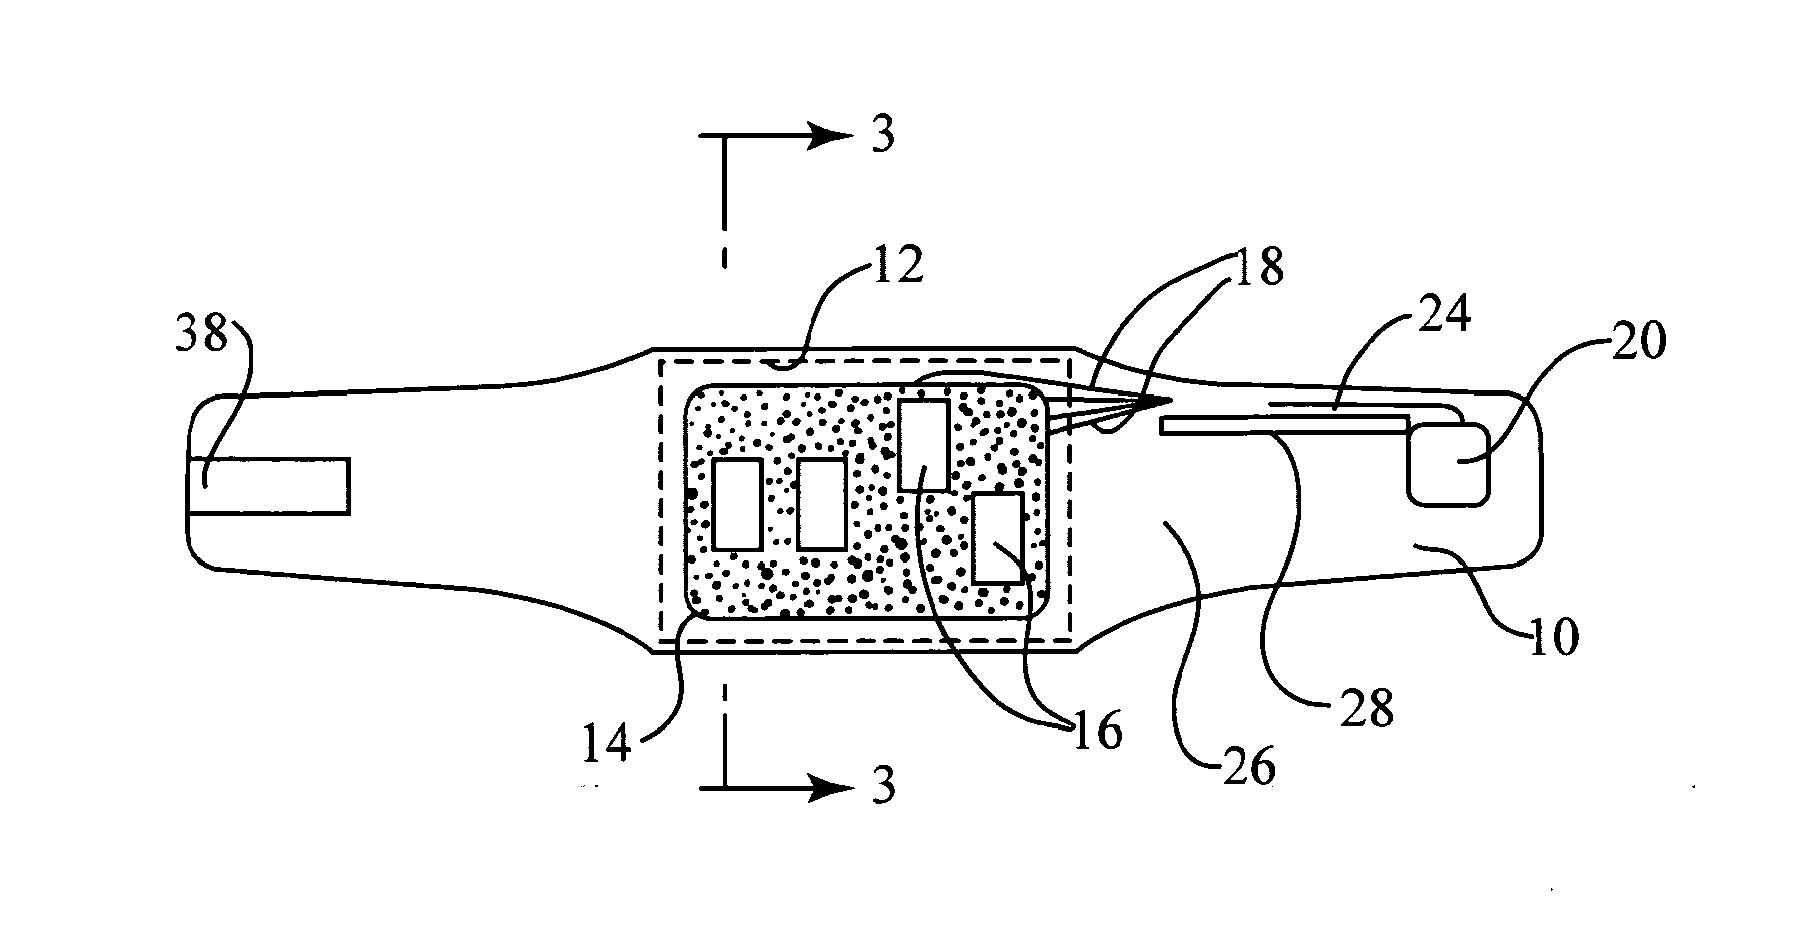 Holder for simultaneously applying a gel pack and a transcutaneous electrical nerve/muscle stimulator